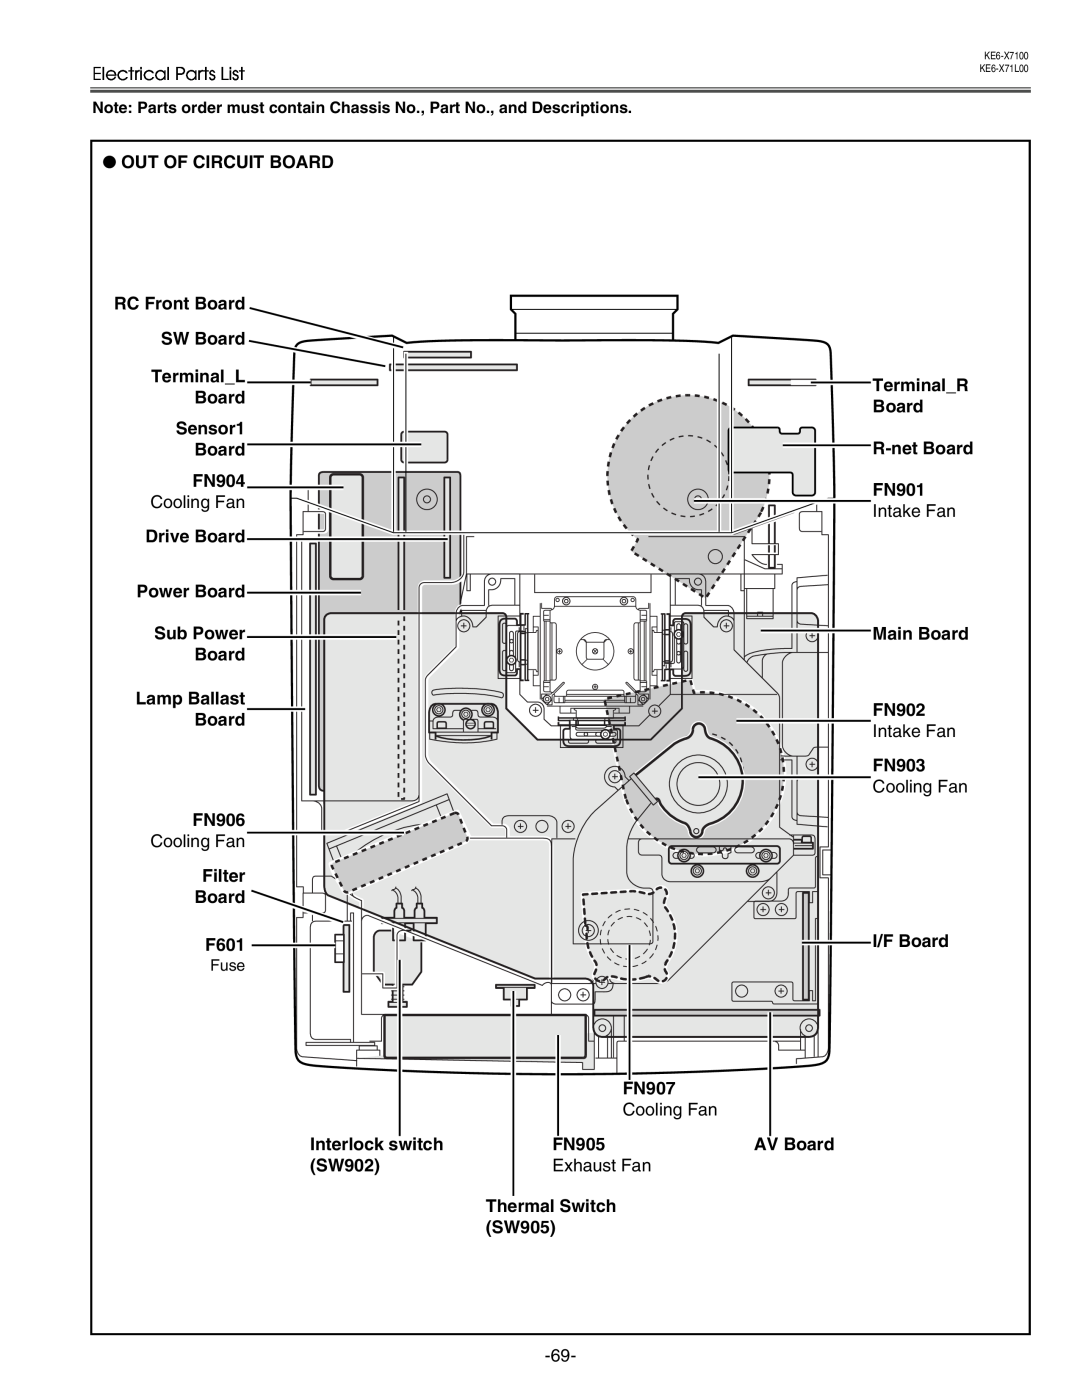 Eiki LC-X71 LC-X71L service manual Electrical Parts List, Cooling Fan 